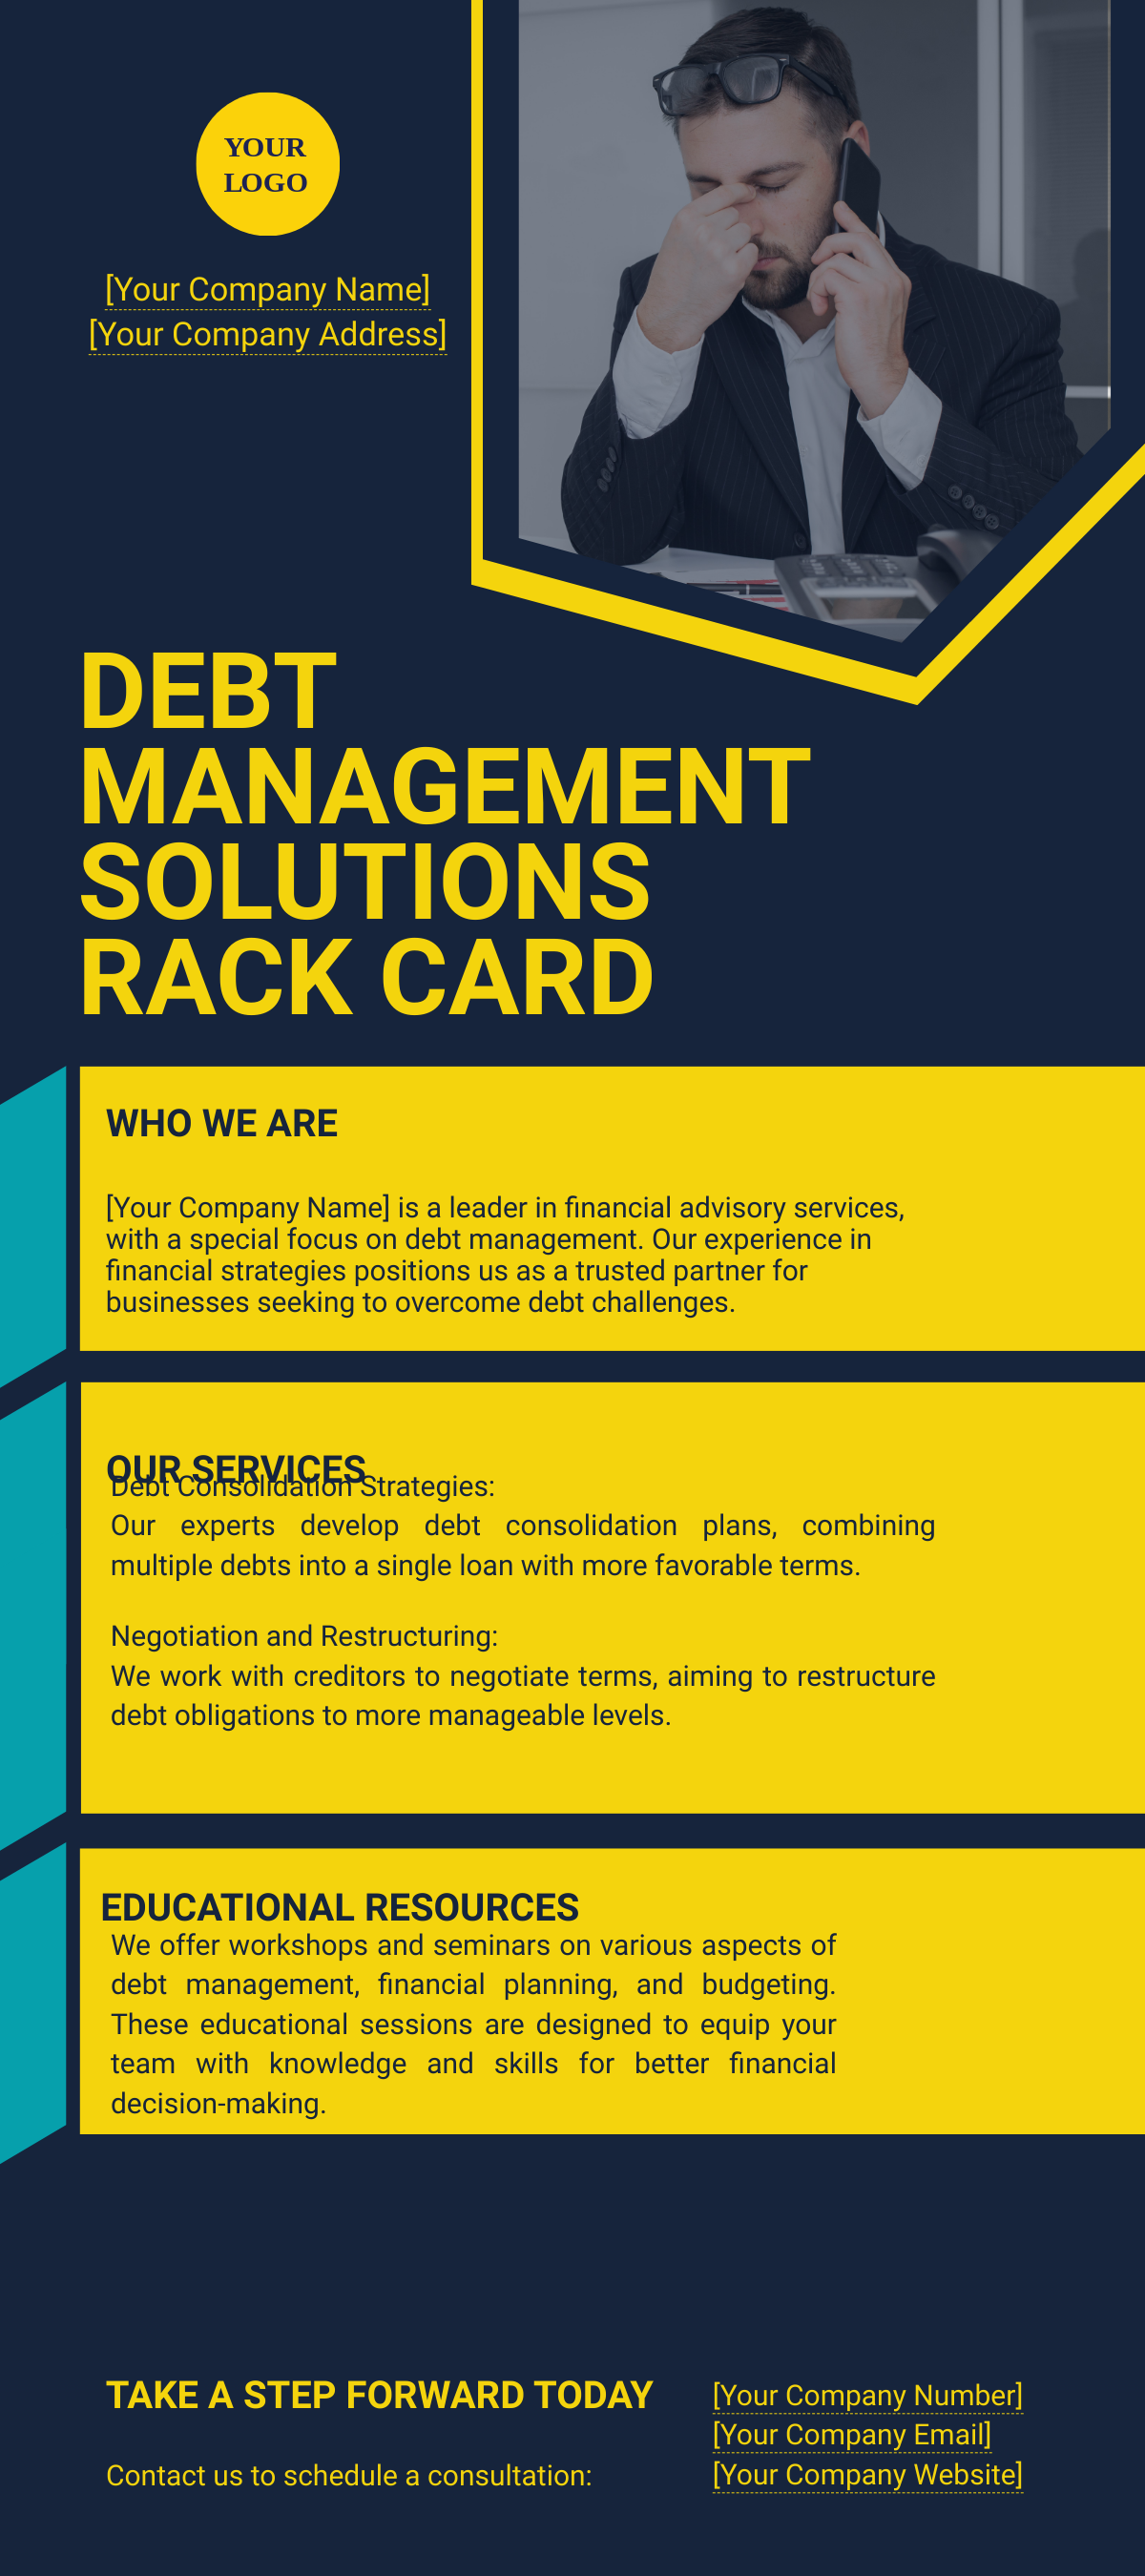 Free Debt Management Solutions Rack Card Template